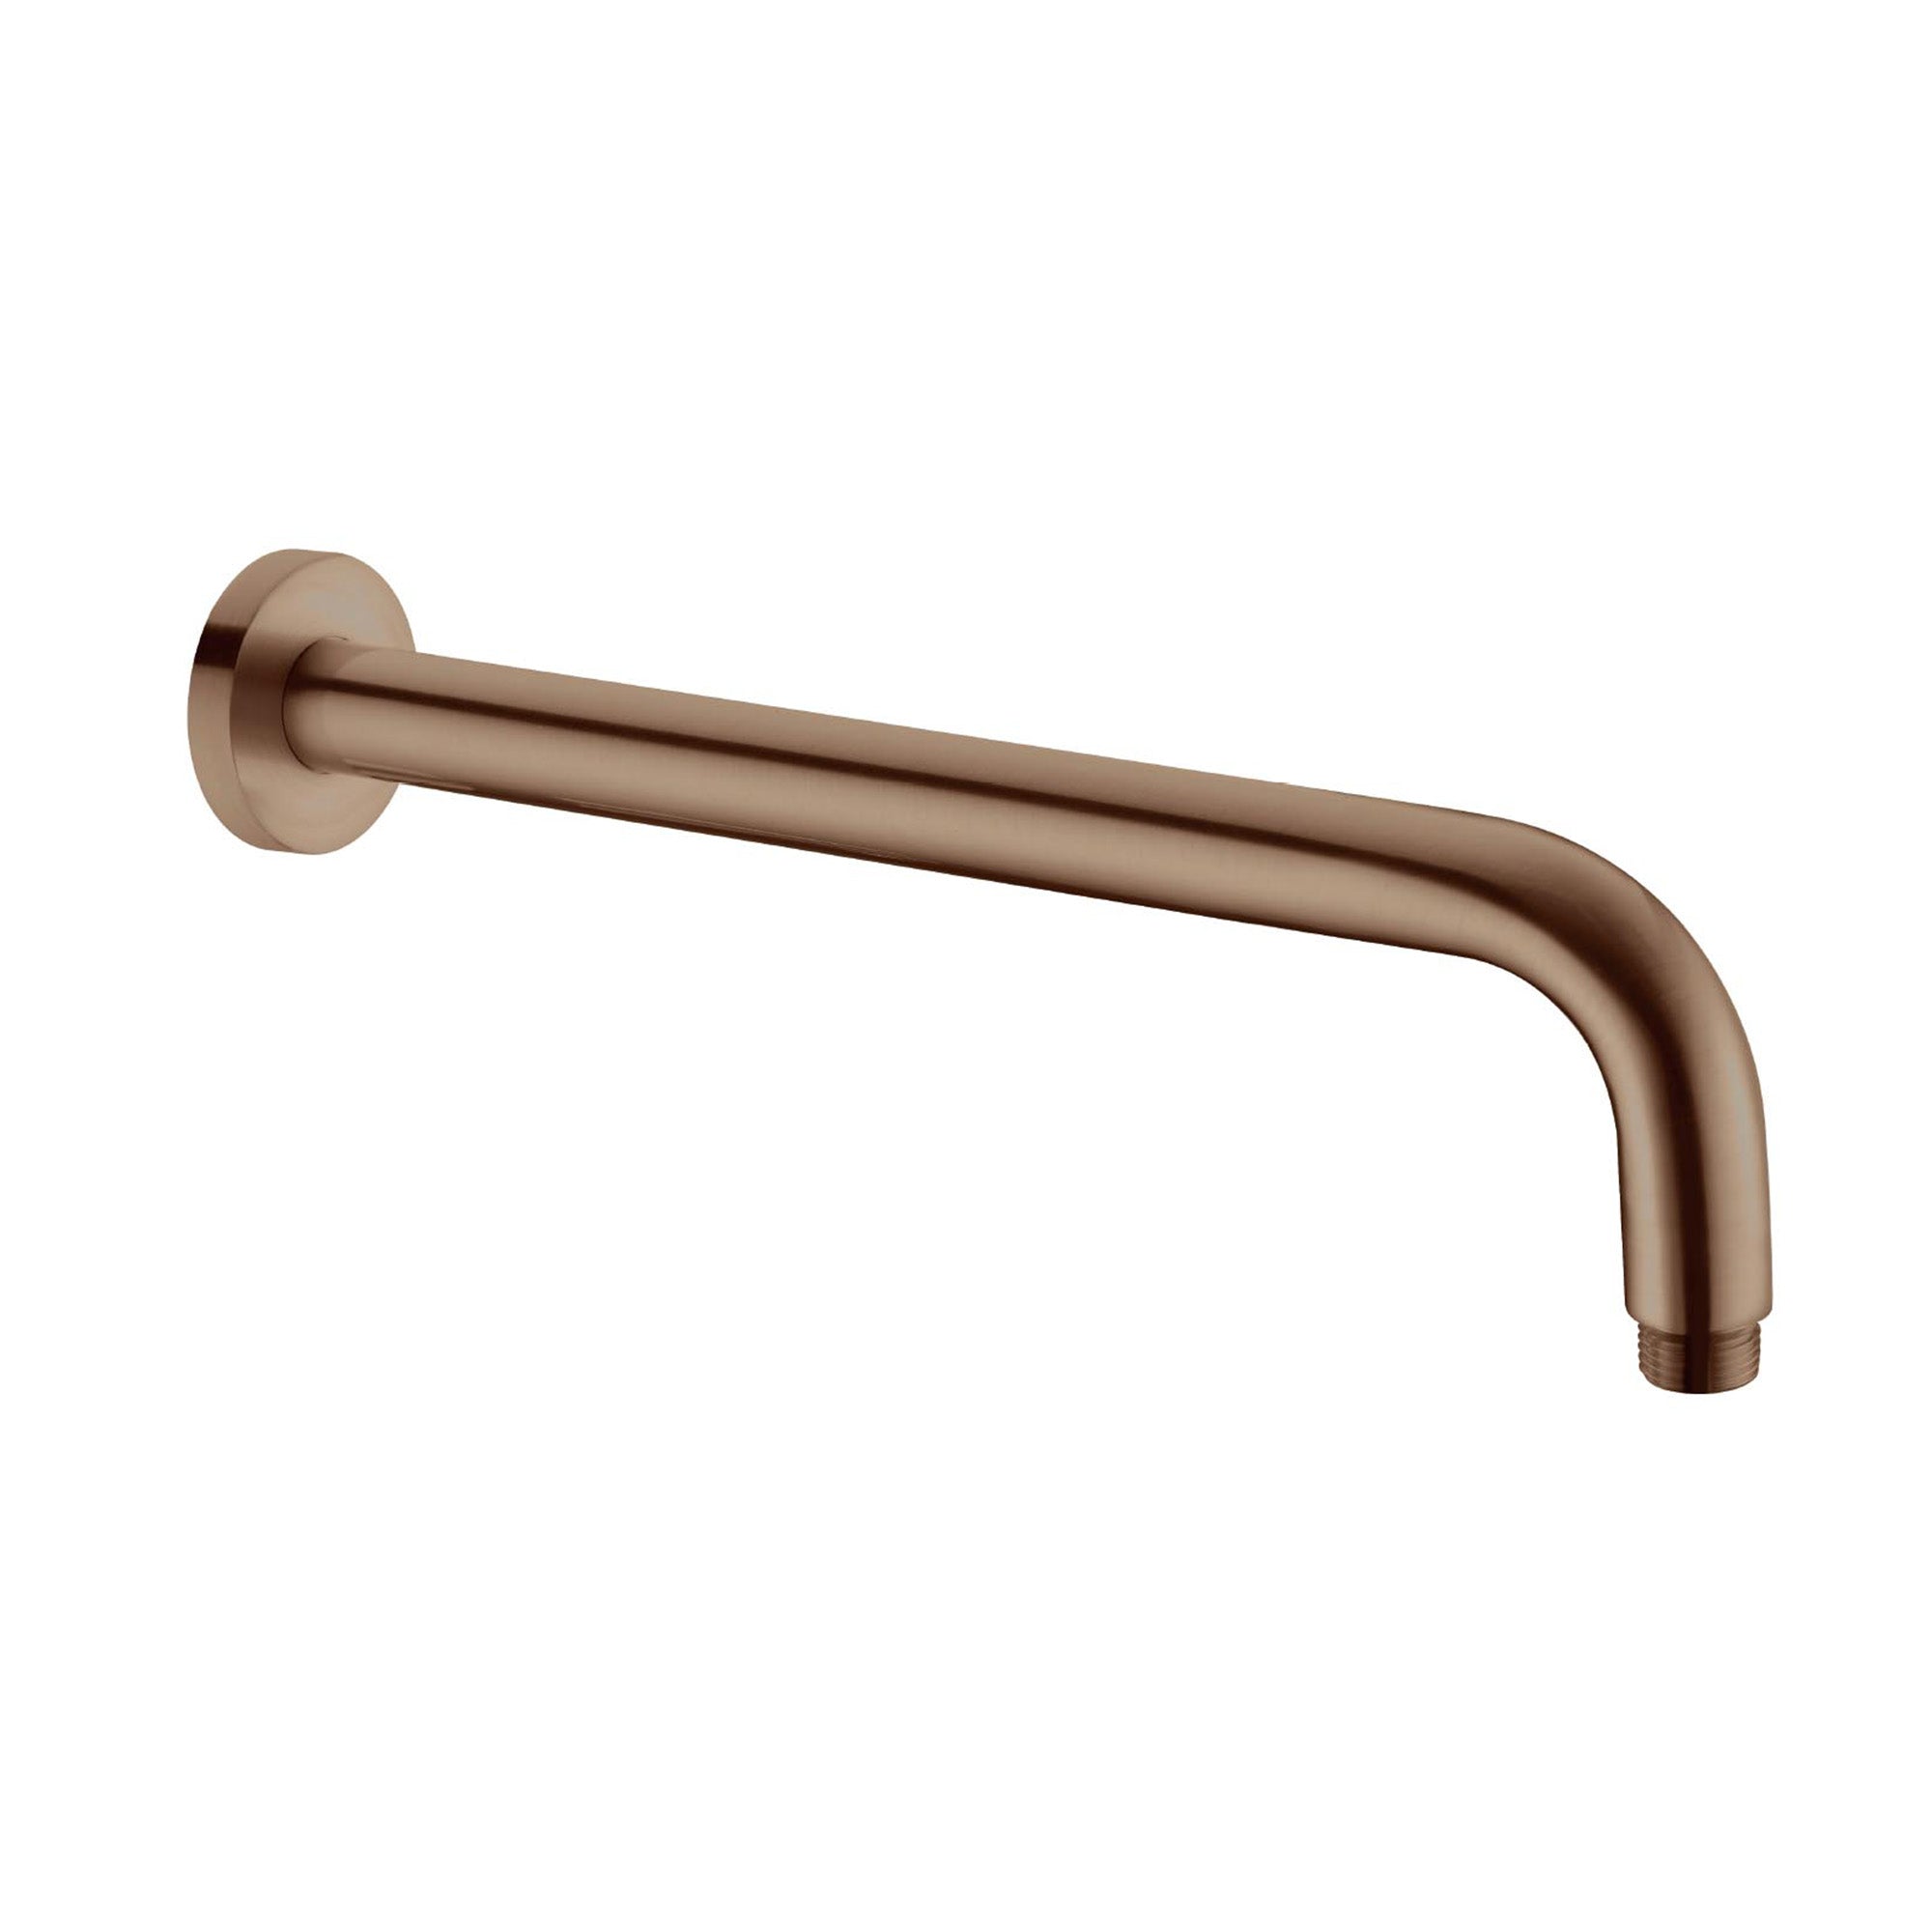 ROUND SHOWER ARM 330MM LENGTH BRUSHED BRONZE